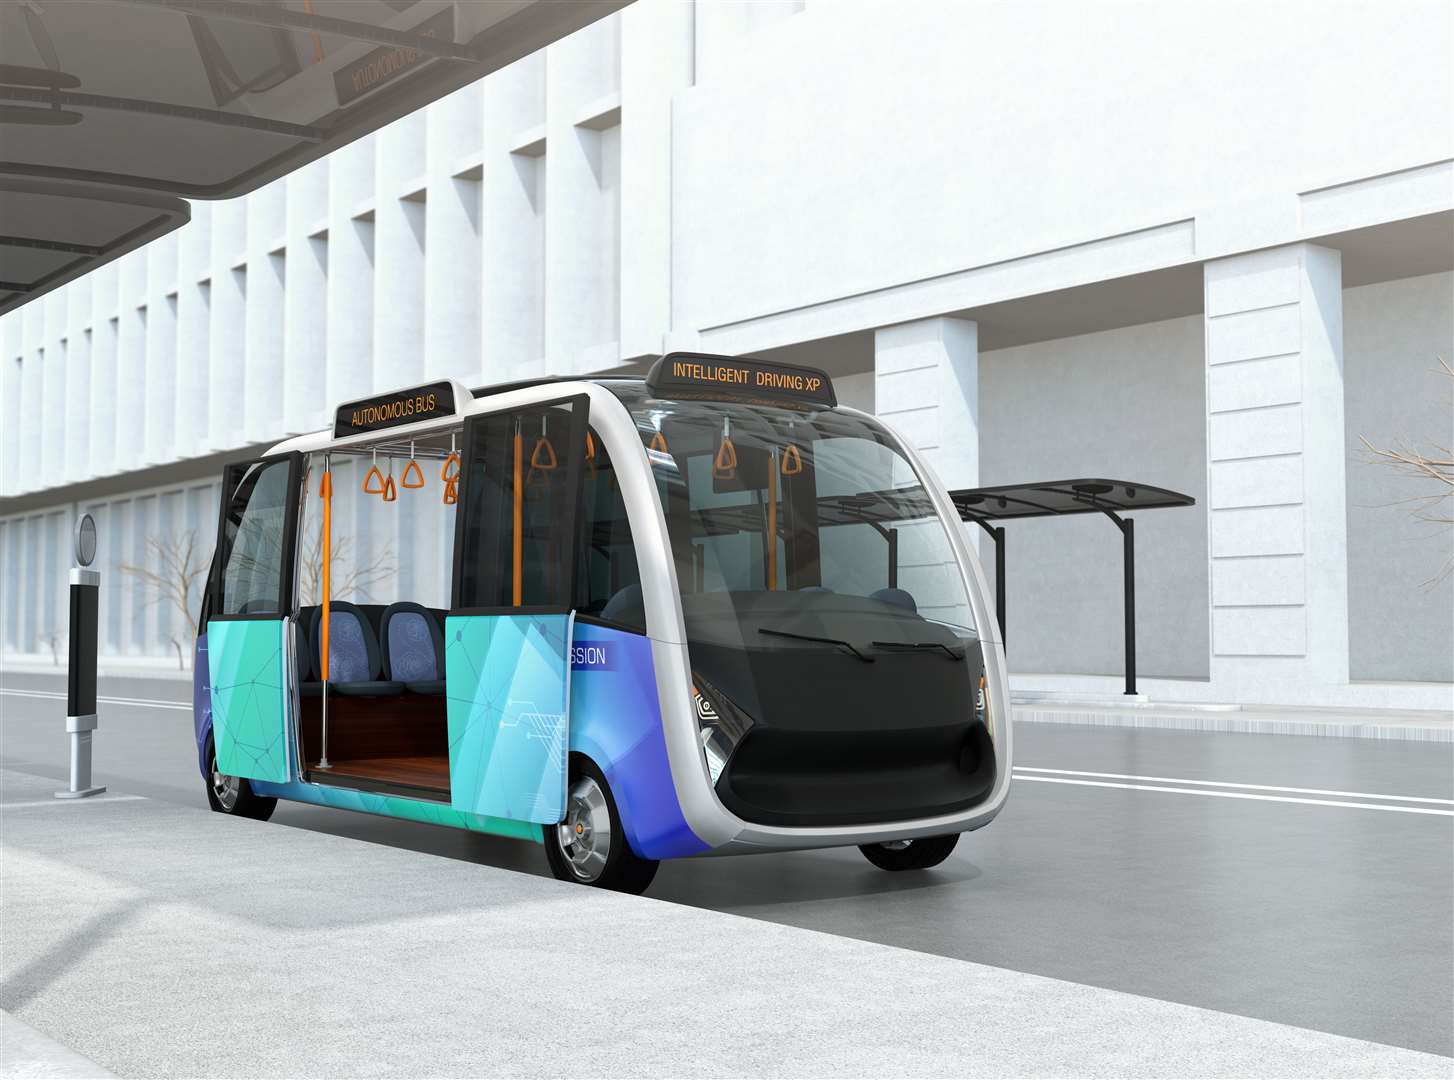 Self-driving shuttle bus waiting at bus station. The bus station equipped with solar panels for electric power. 3D rendering image.